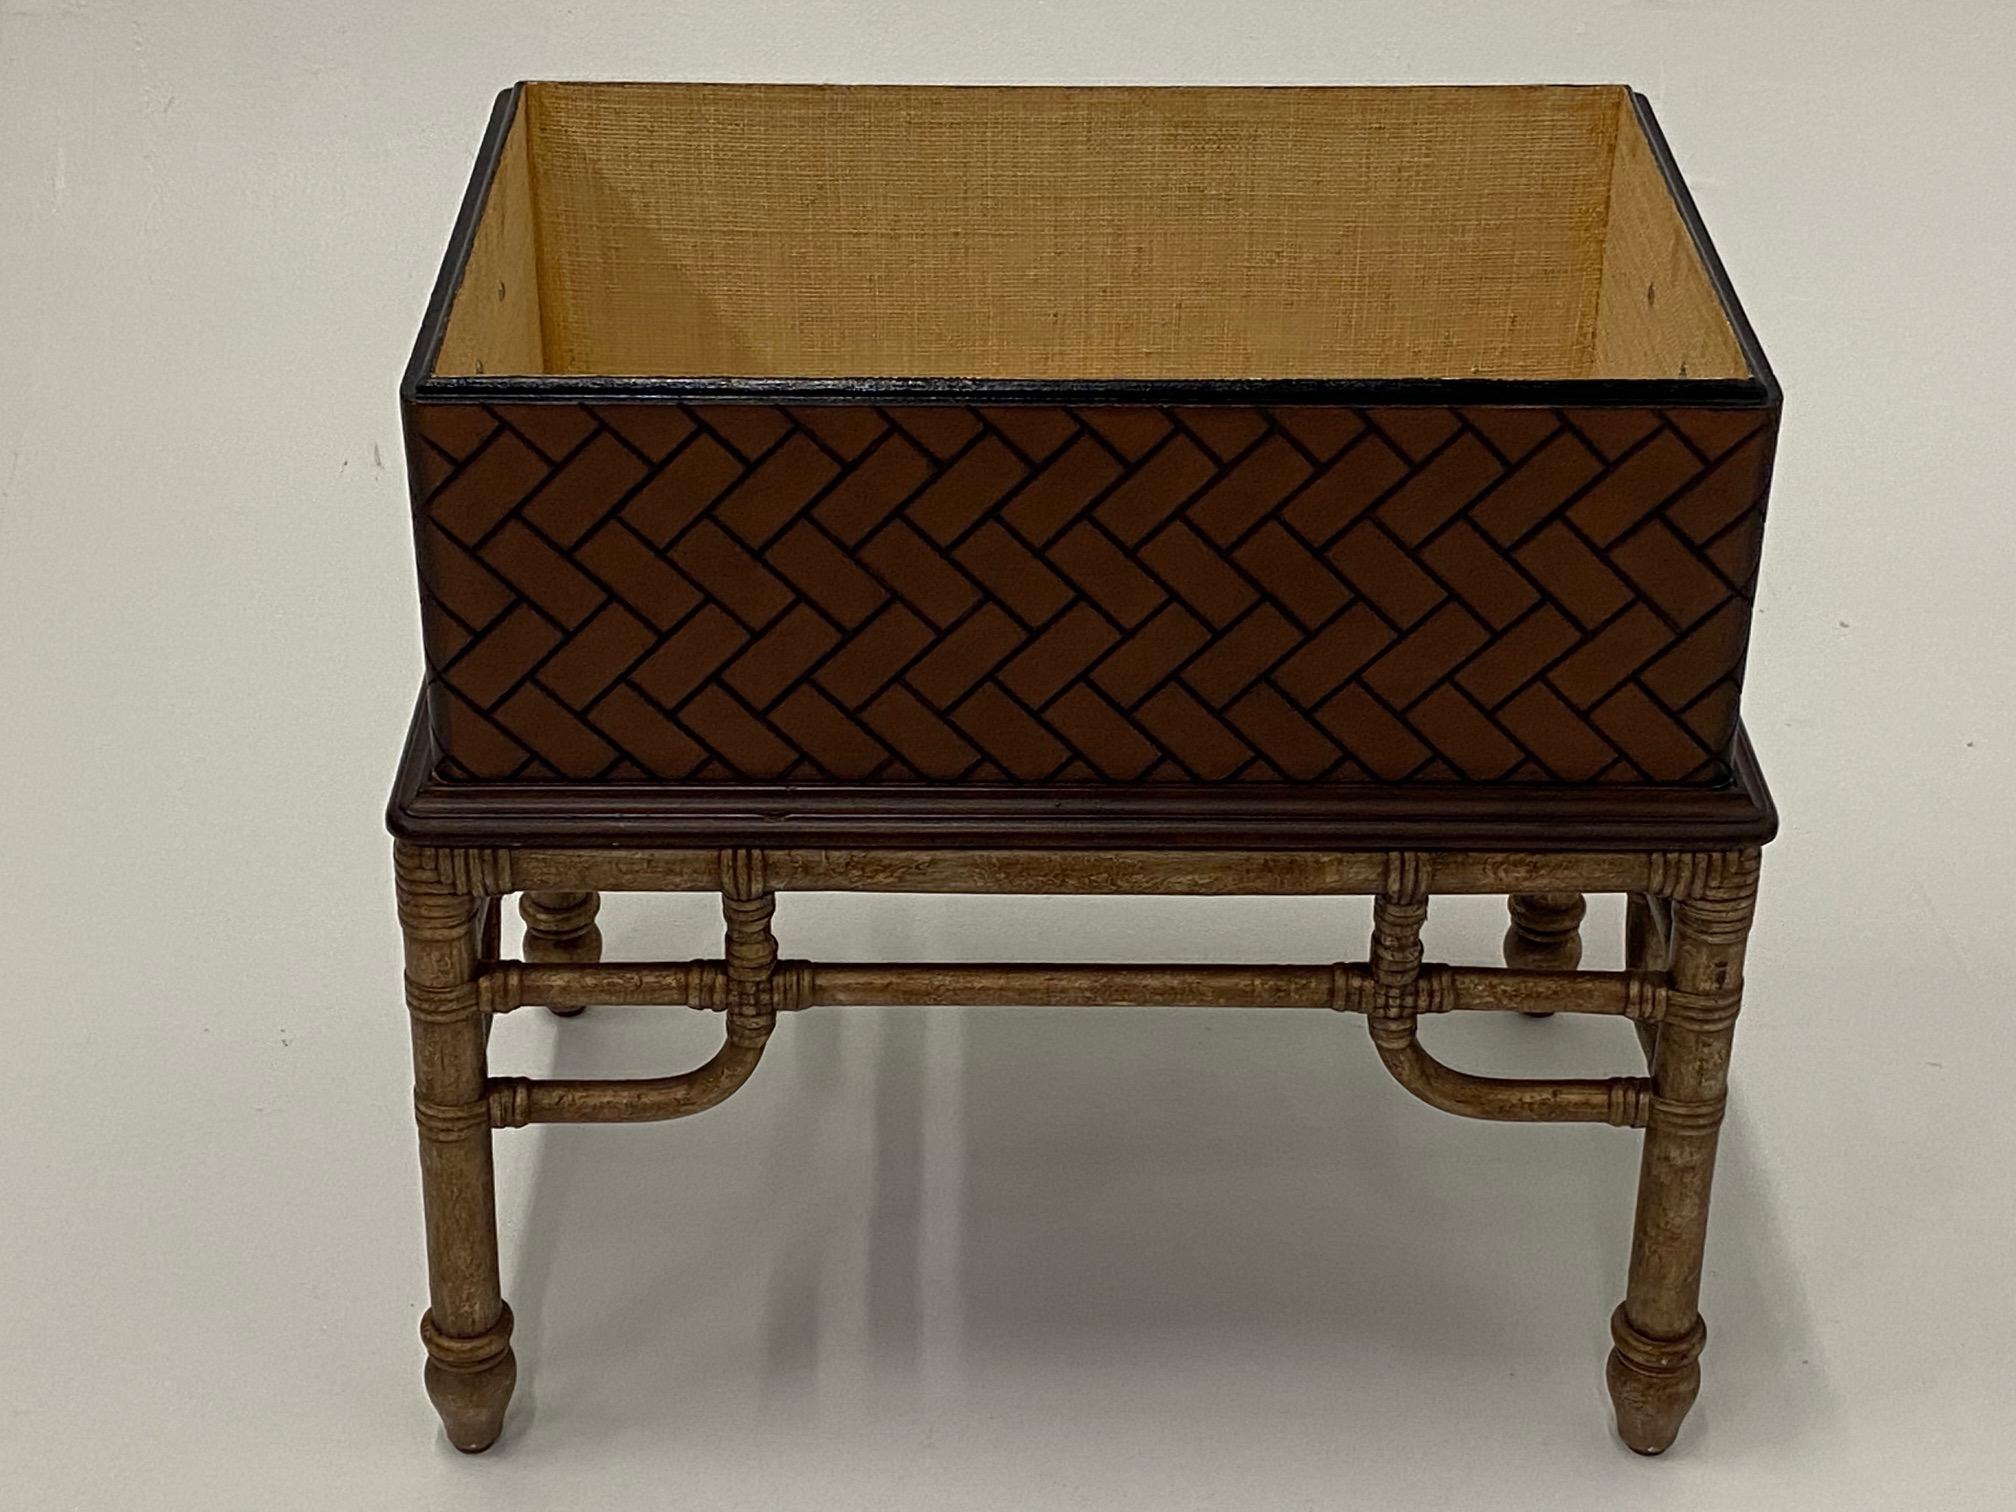 Handsome wooden box in a woven motive that sits on a bamboo stand, lined in linen with removable lid.